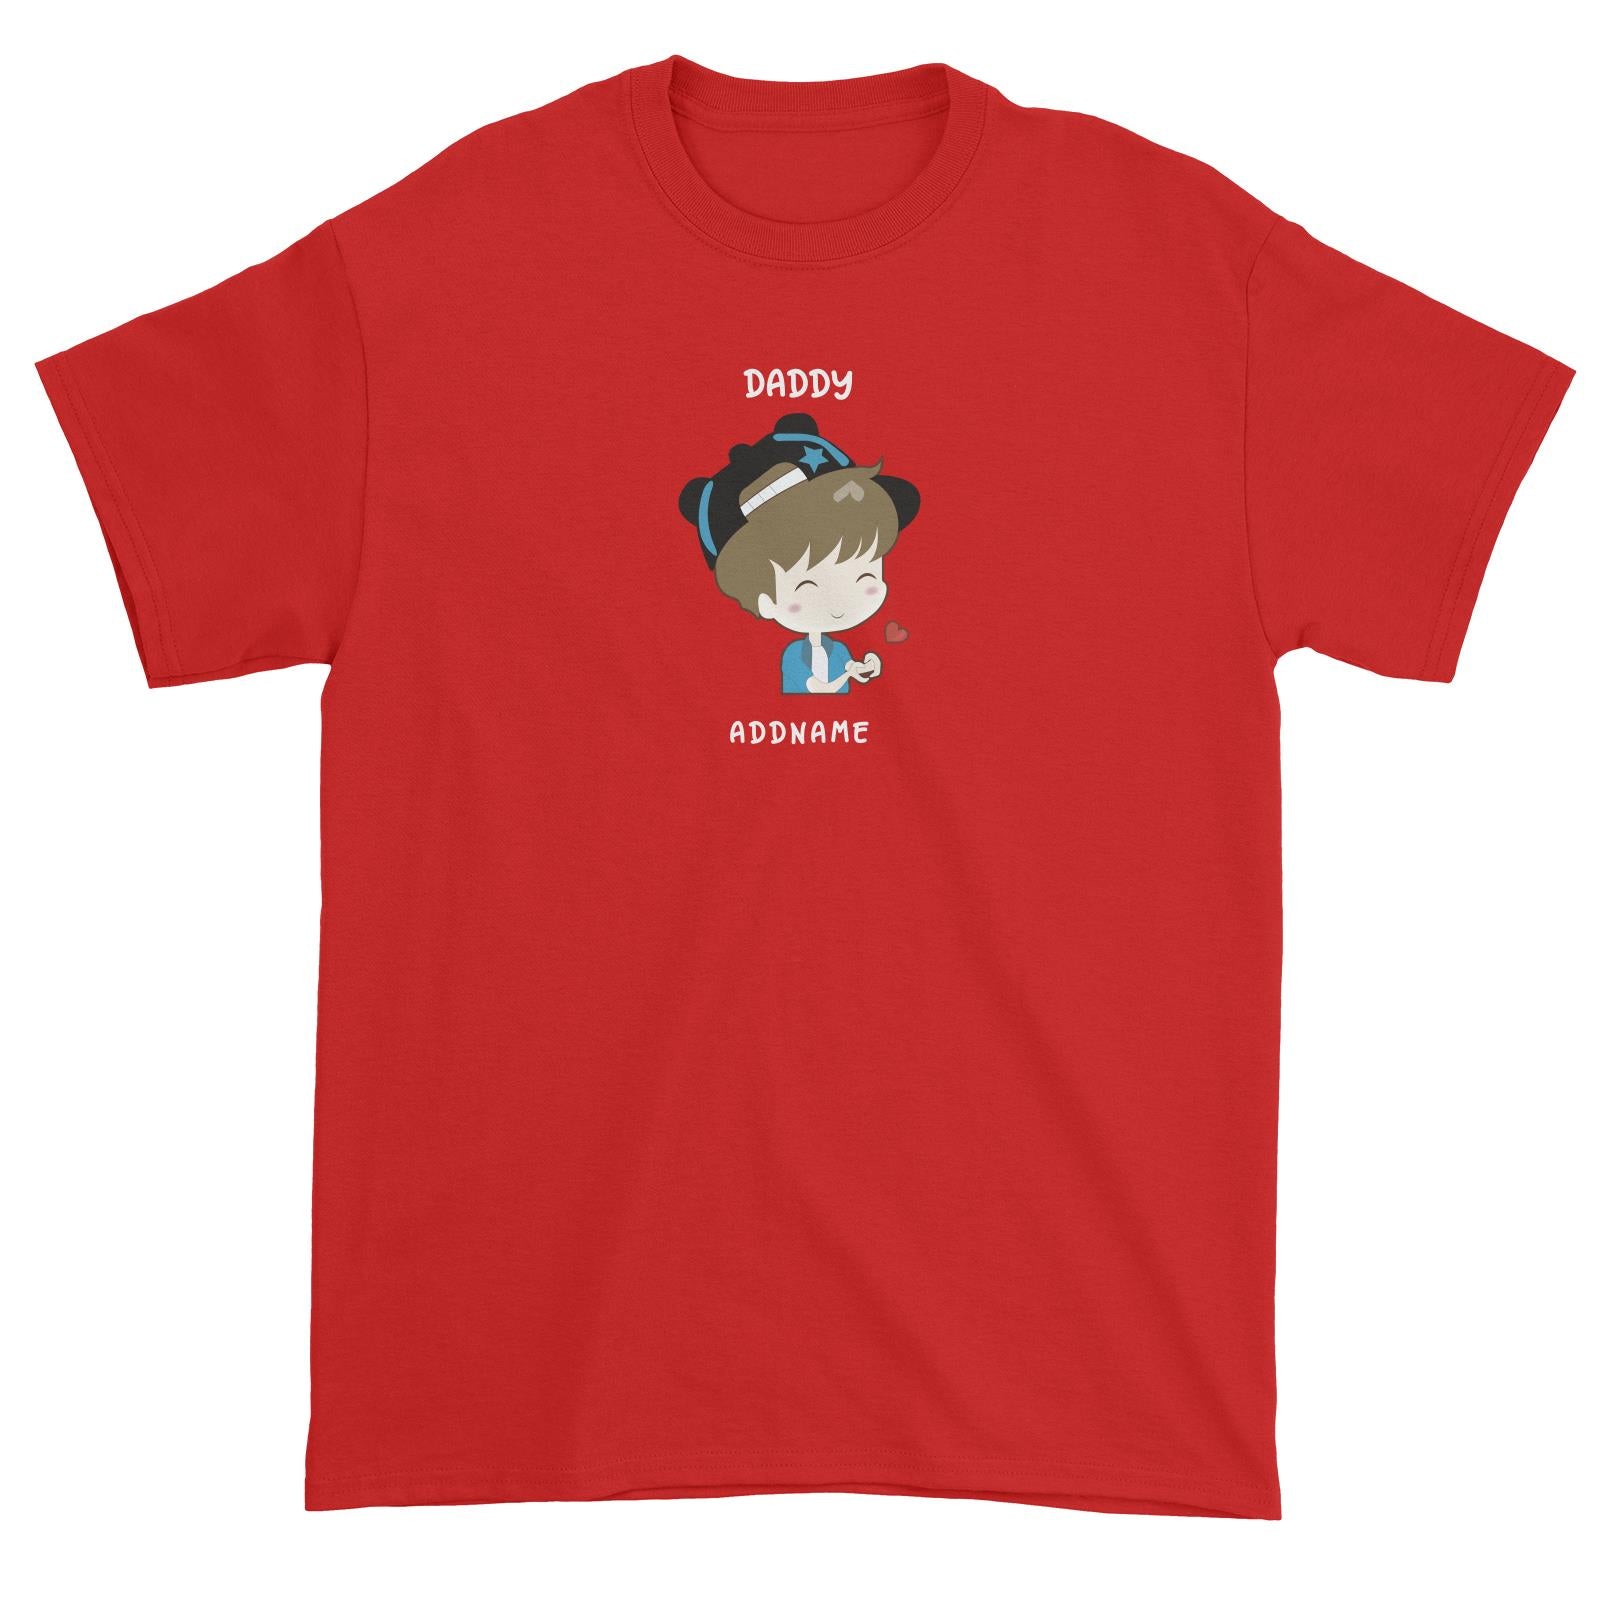 My Lovely Family Series Daddy Addname Unisex T-Shirt